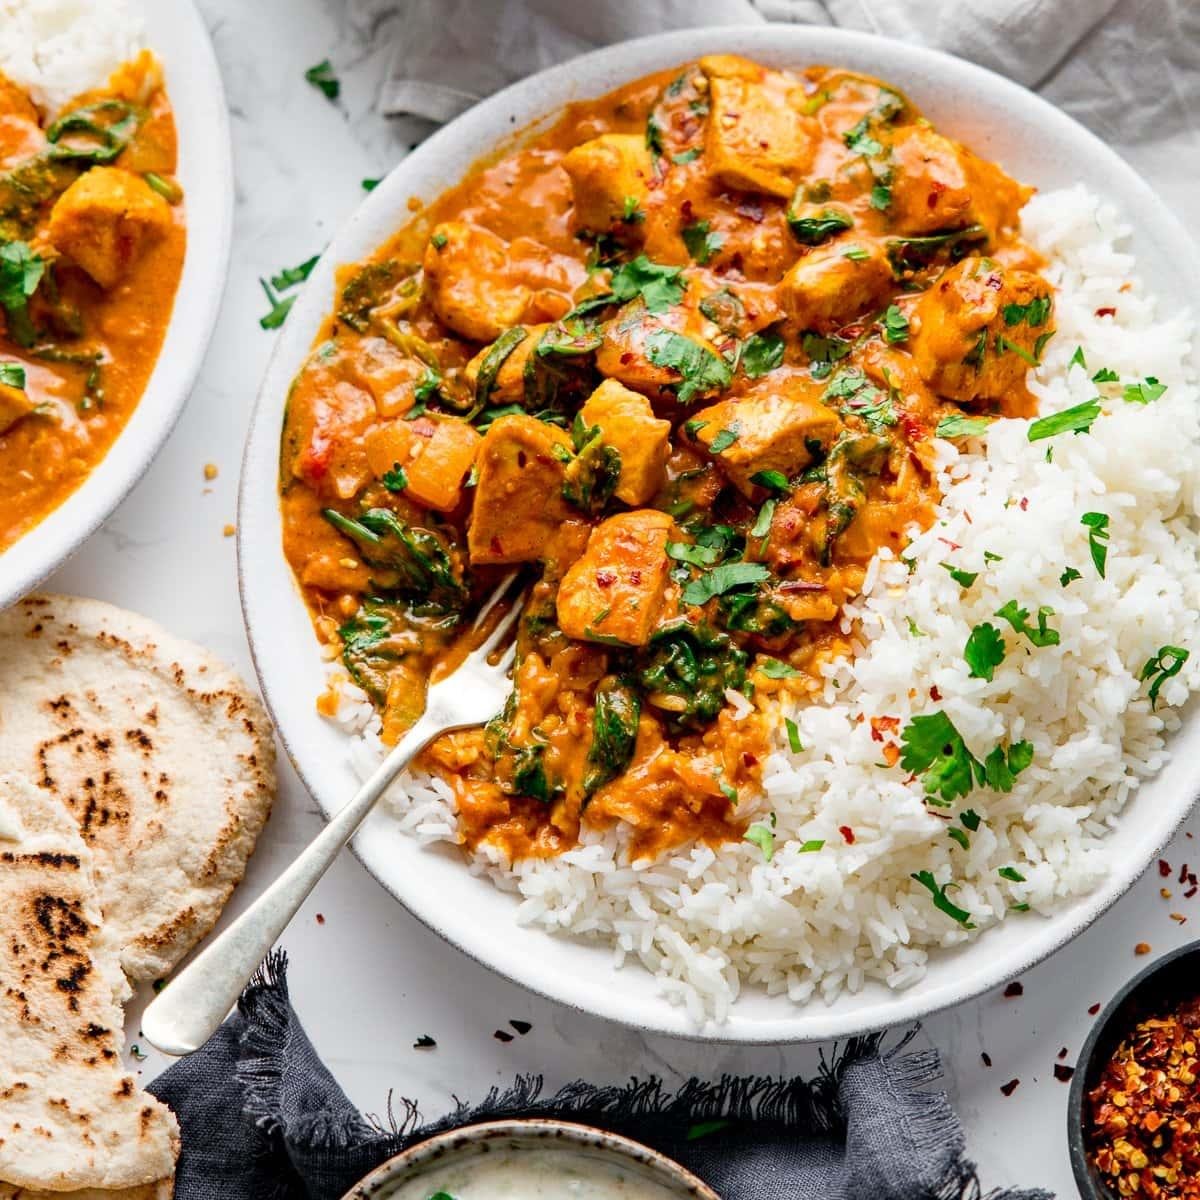 Spice up your Weeknights with this Easy and Flavorful Chicken Curry Recipe